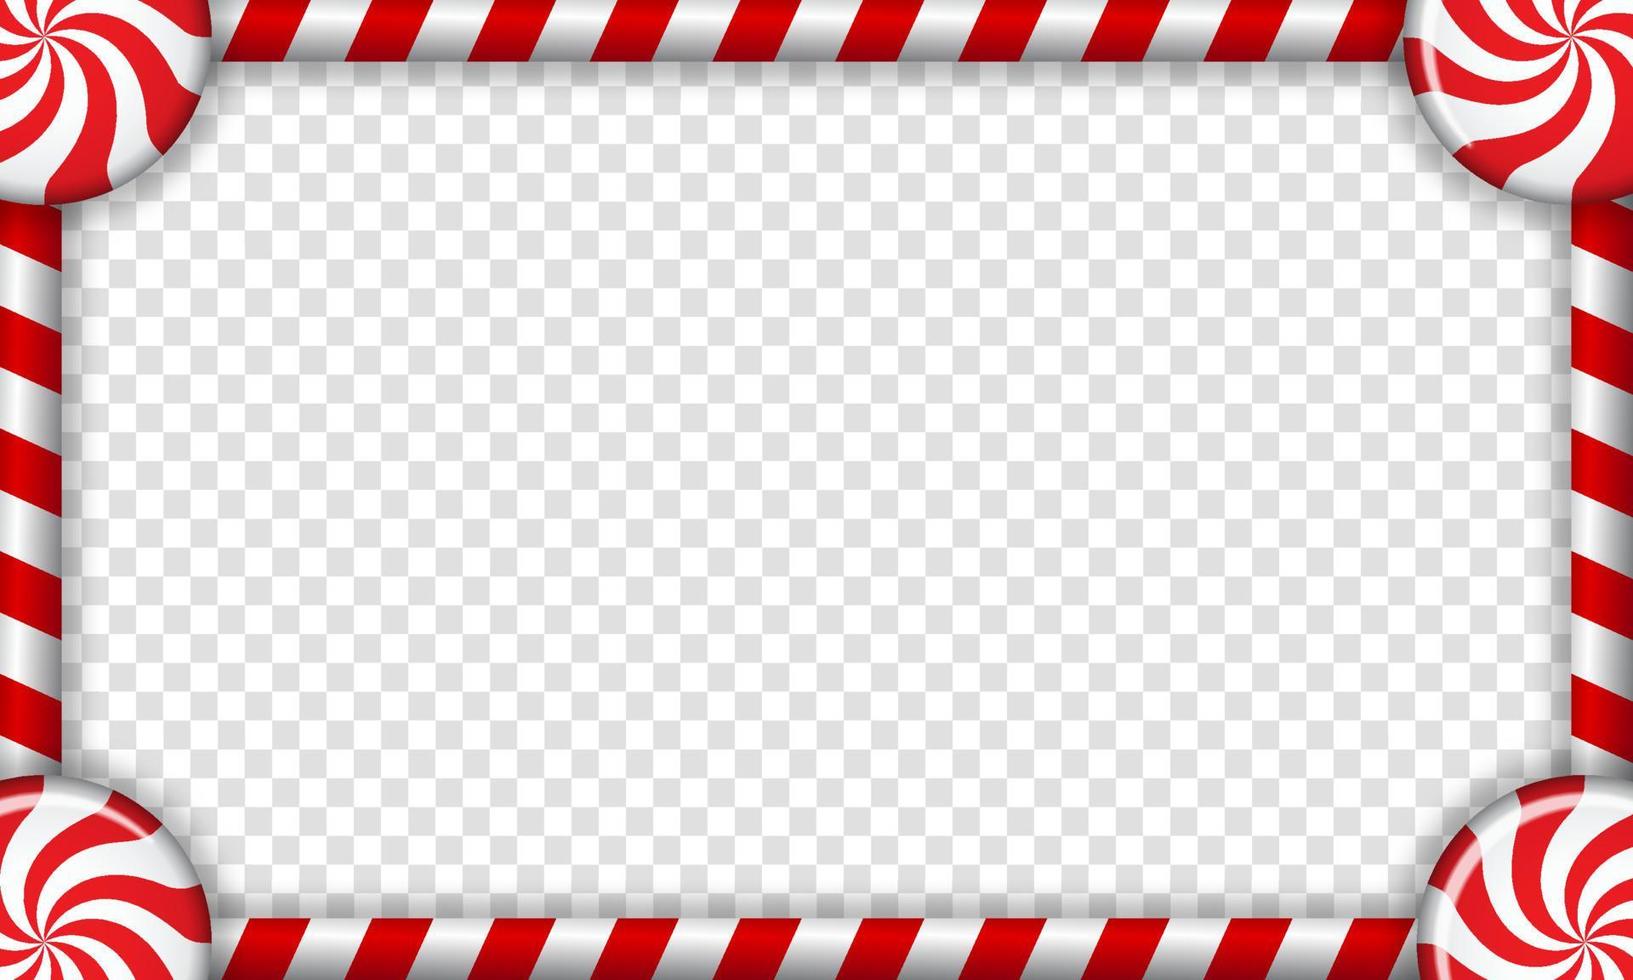 Rectangle candy cane frame with red and white striped lollipop pattern. Vector illustration